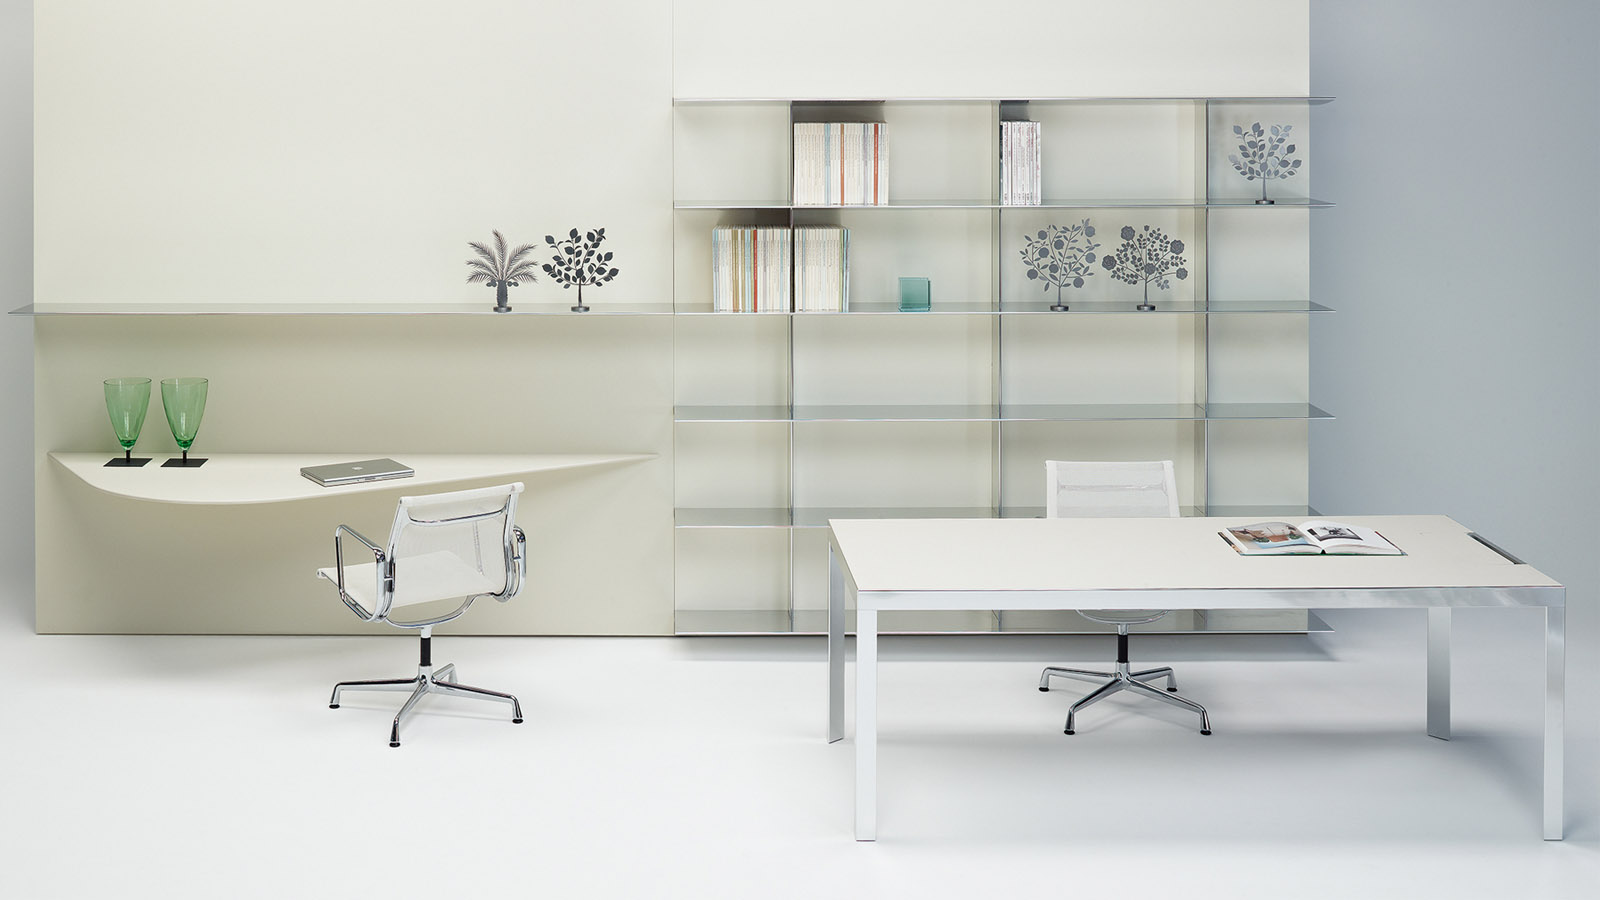 INTERIOR DESIGN OFFICES WHICH MATERIALS TO USE